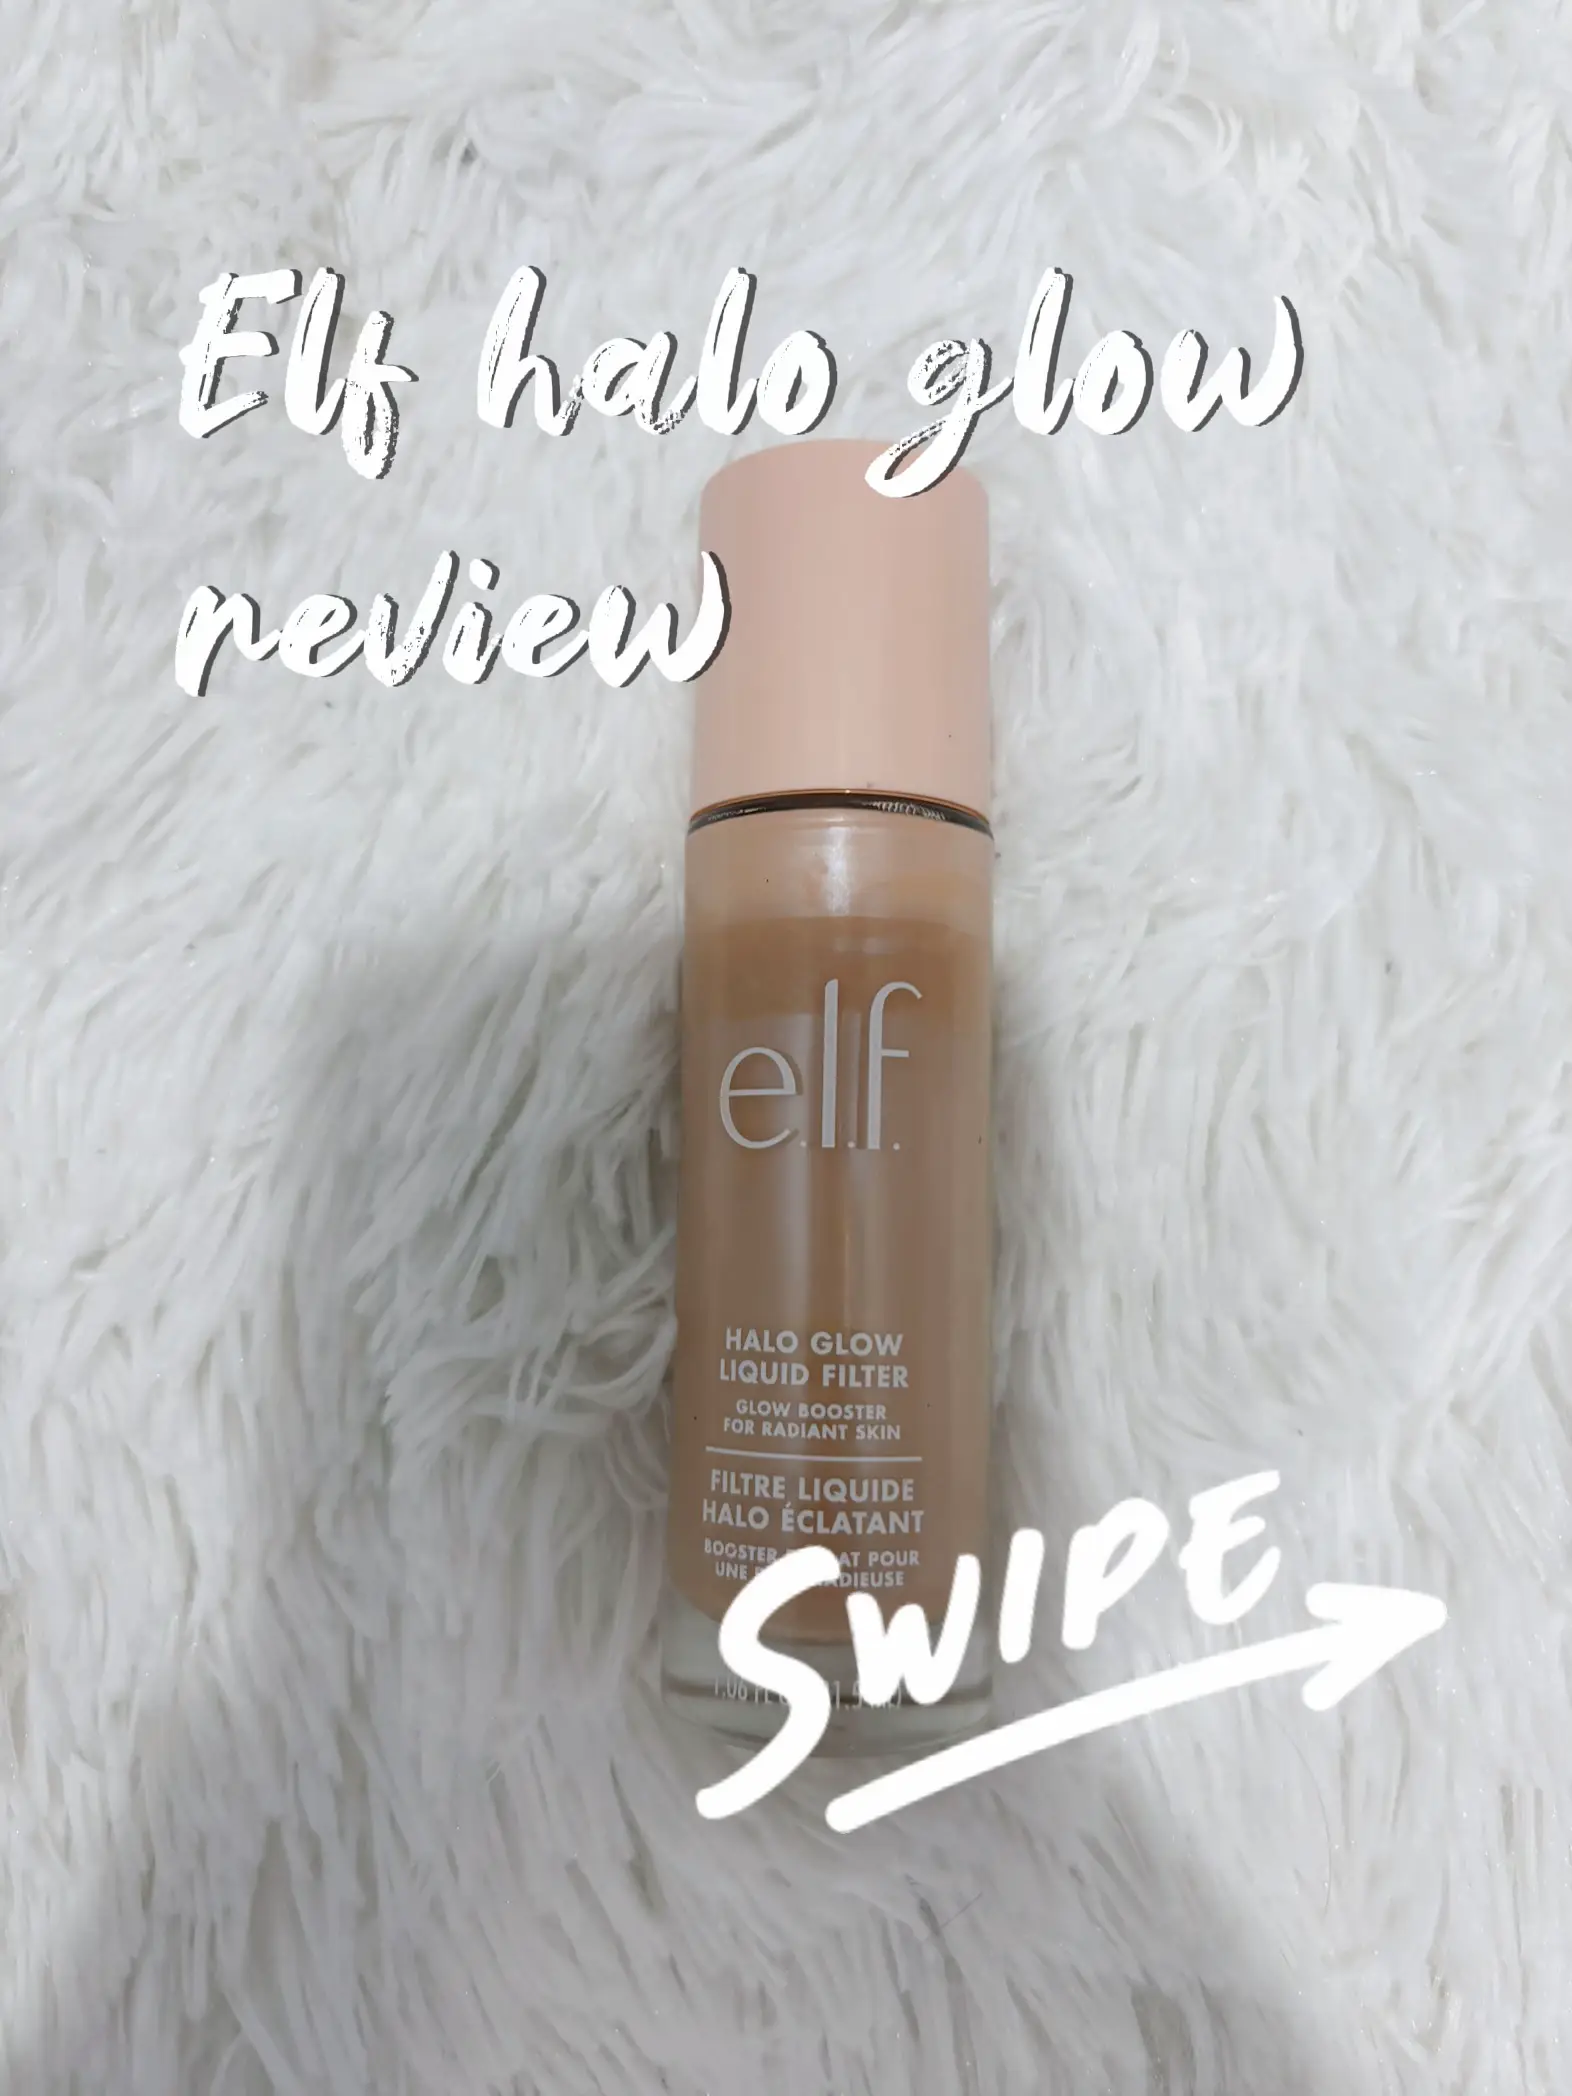 RADIATE THE NEW HALO GLOW WITH THE NU HALO TINT HIGHLIGHTER.